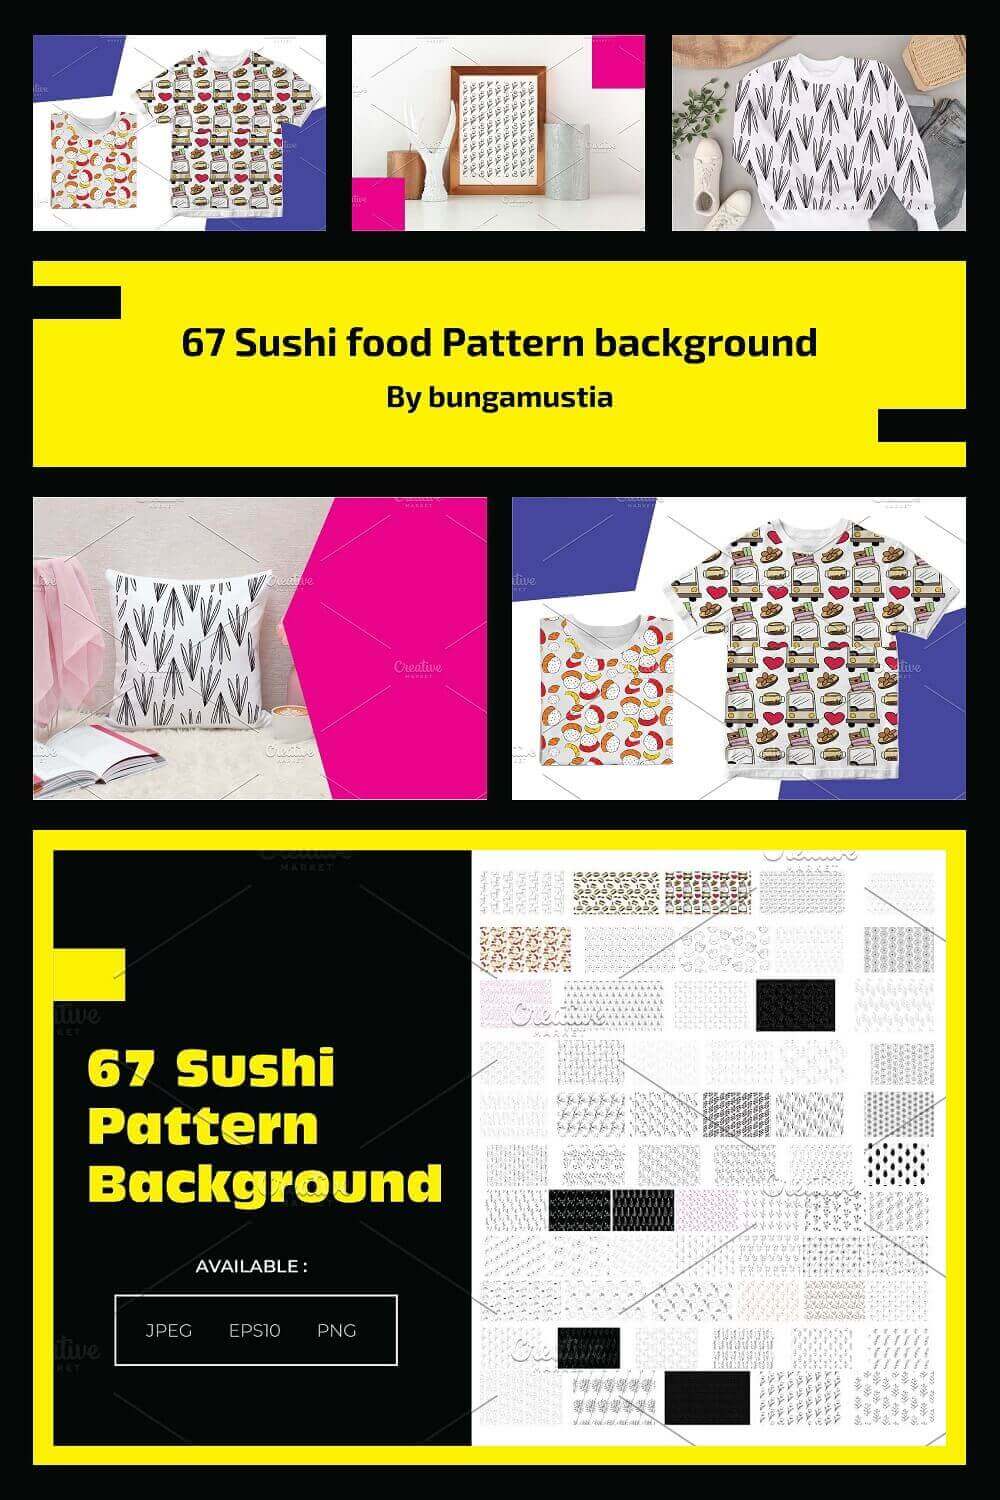 T-shirts and pillows of Sushi food pattern background.